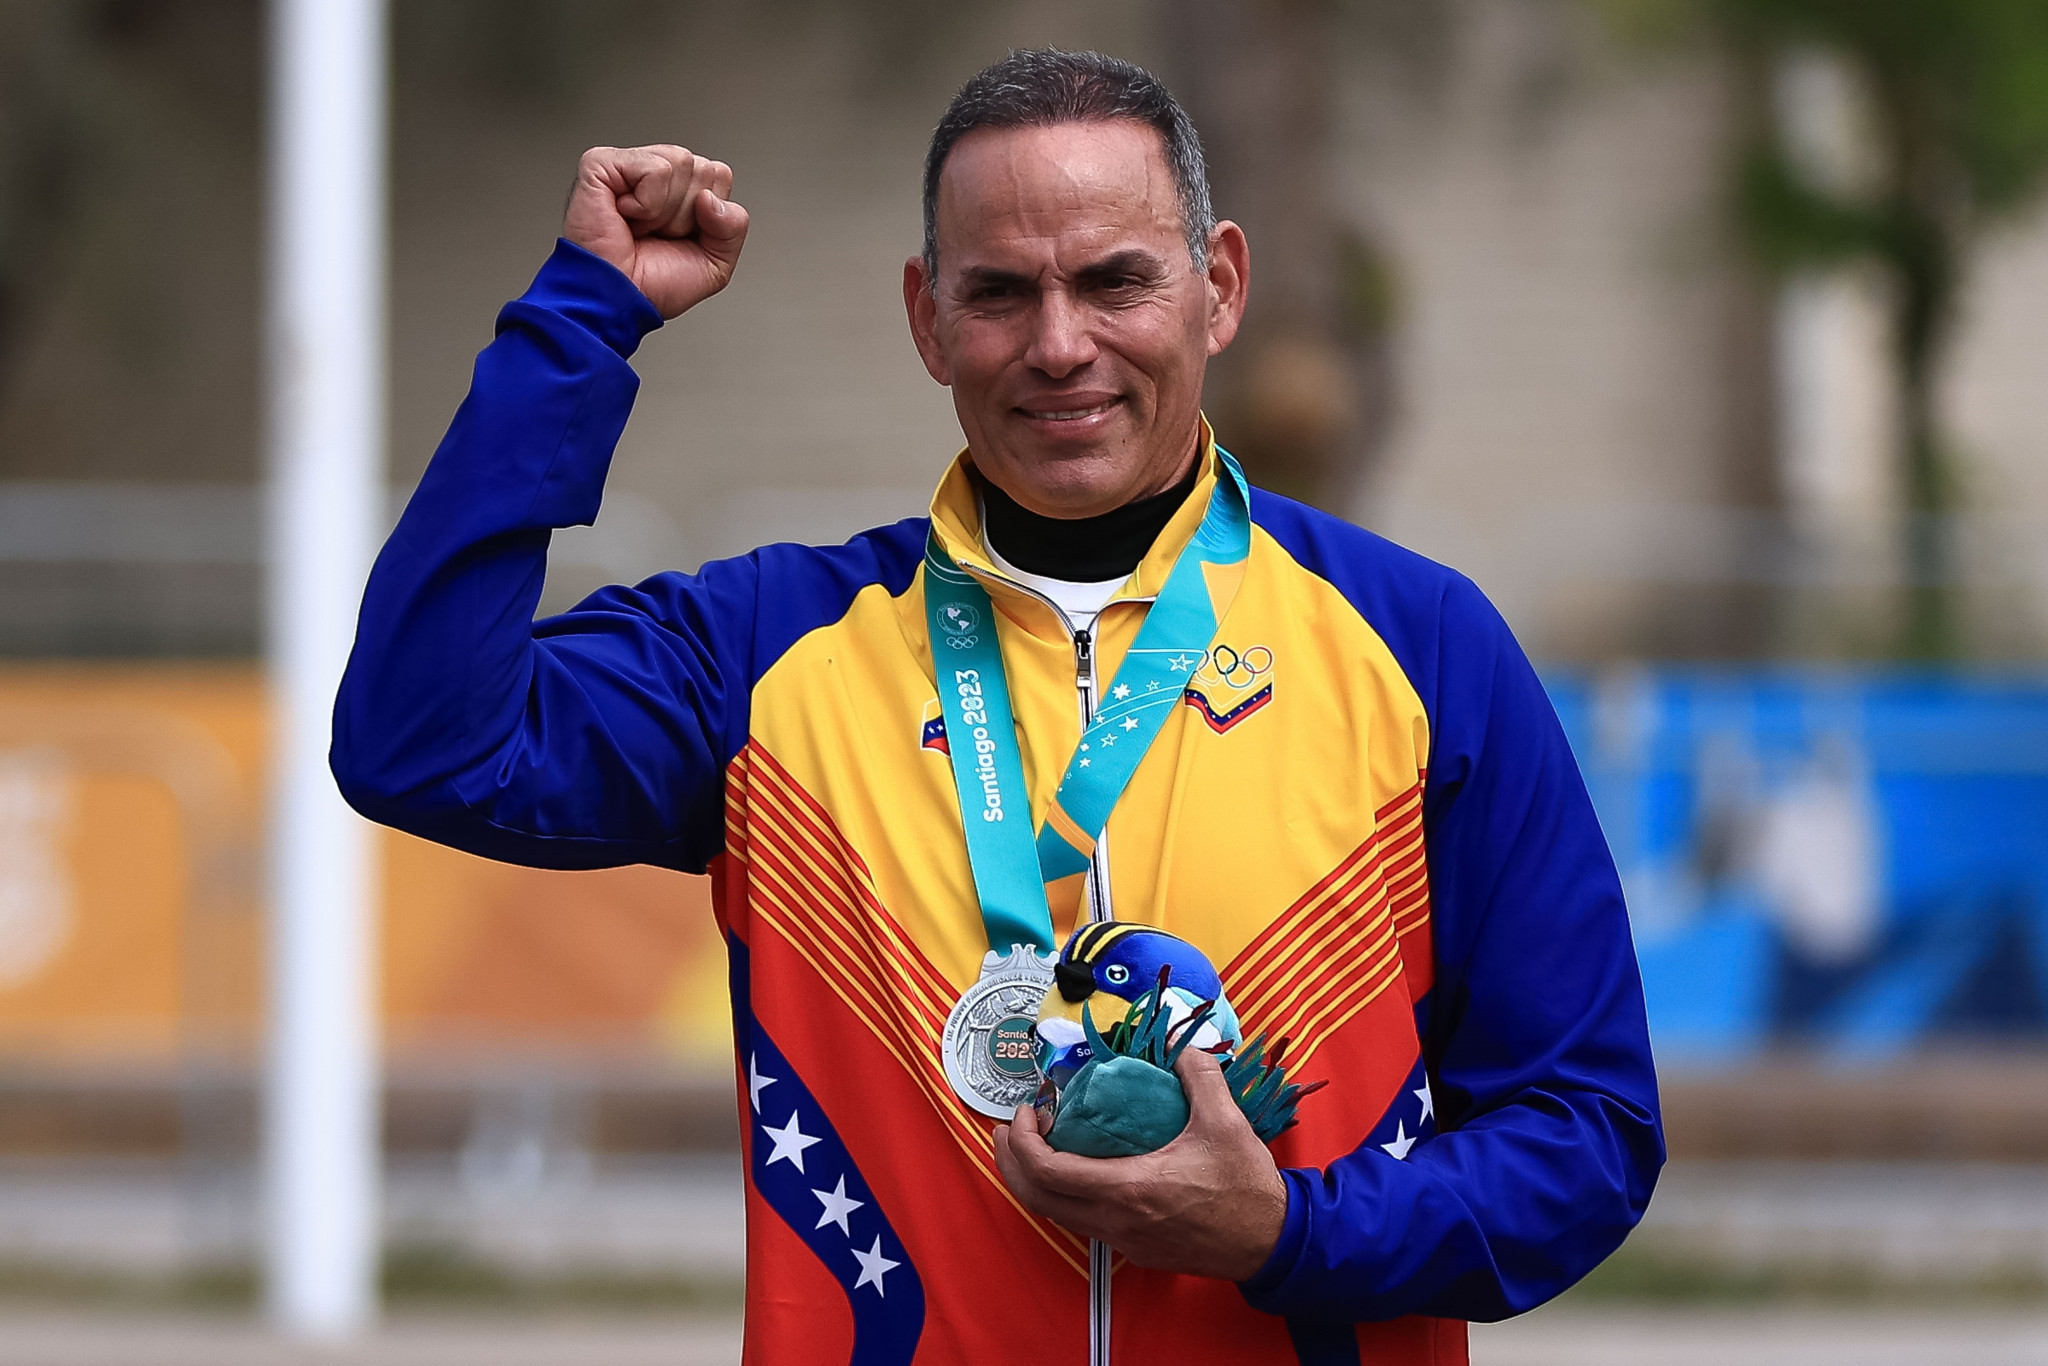 Venezuelan shooter qualifies for Paris 2024 after 40-year wait for second Olympics